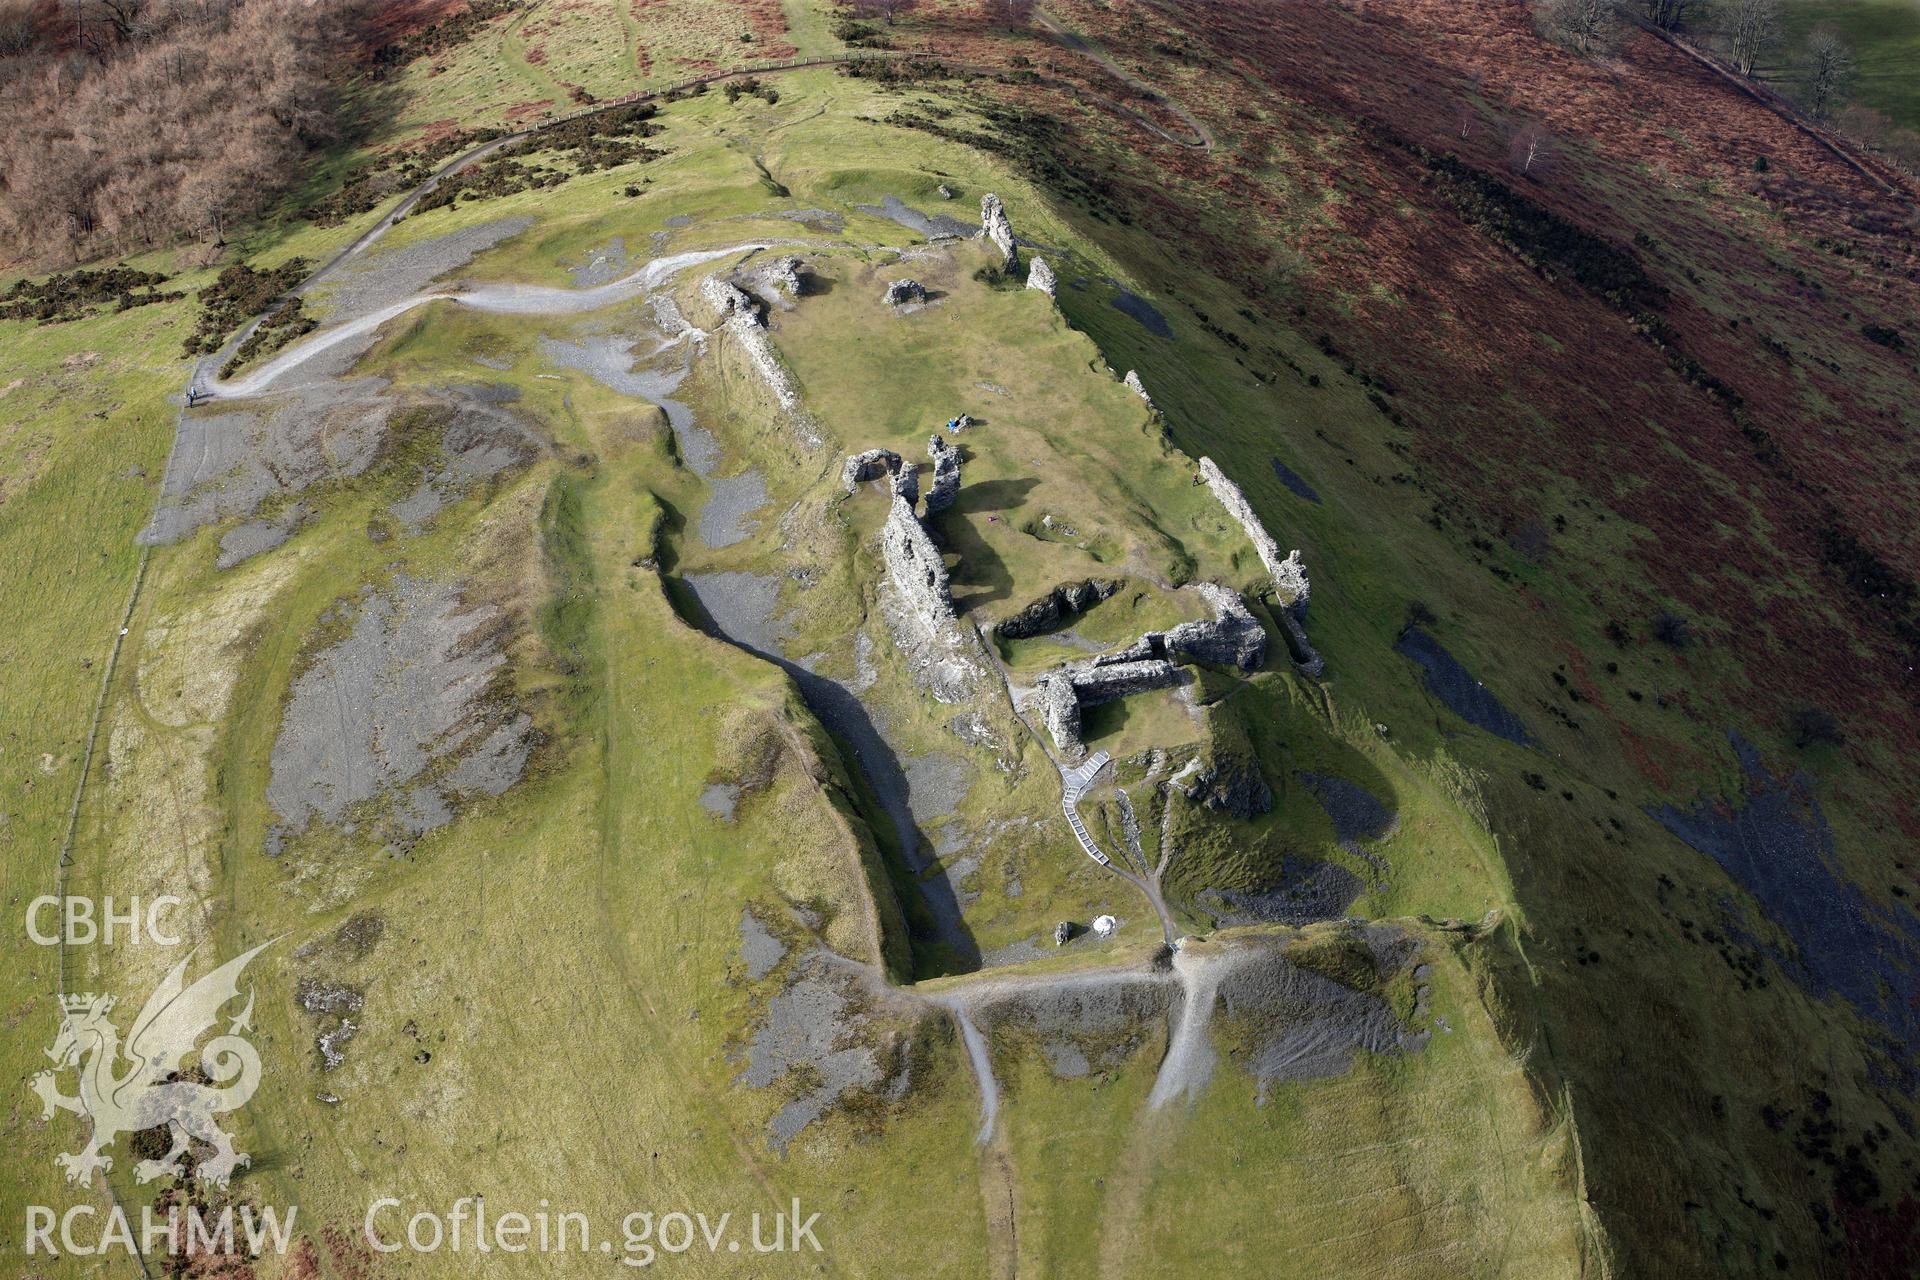 Castell Dinas Bran ruined castle and earthwork enclosure, east of Llangollen. Oblique aerial photograph taken during the Royal Commission?s programme of archaeological aerial reconnaissance by Toby Driver on 28th February 2013.